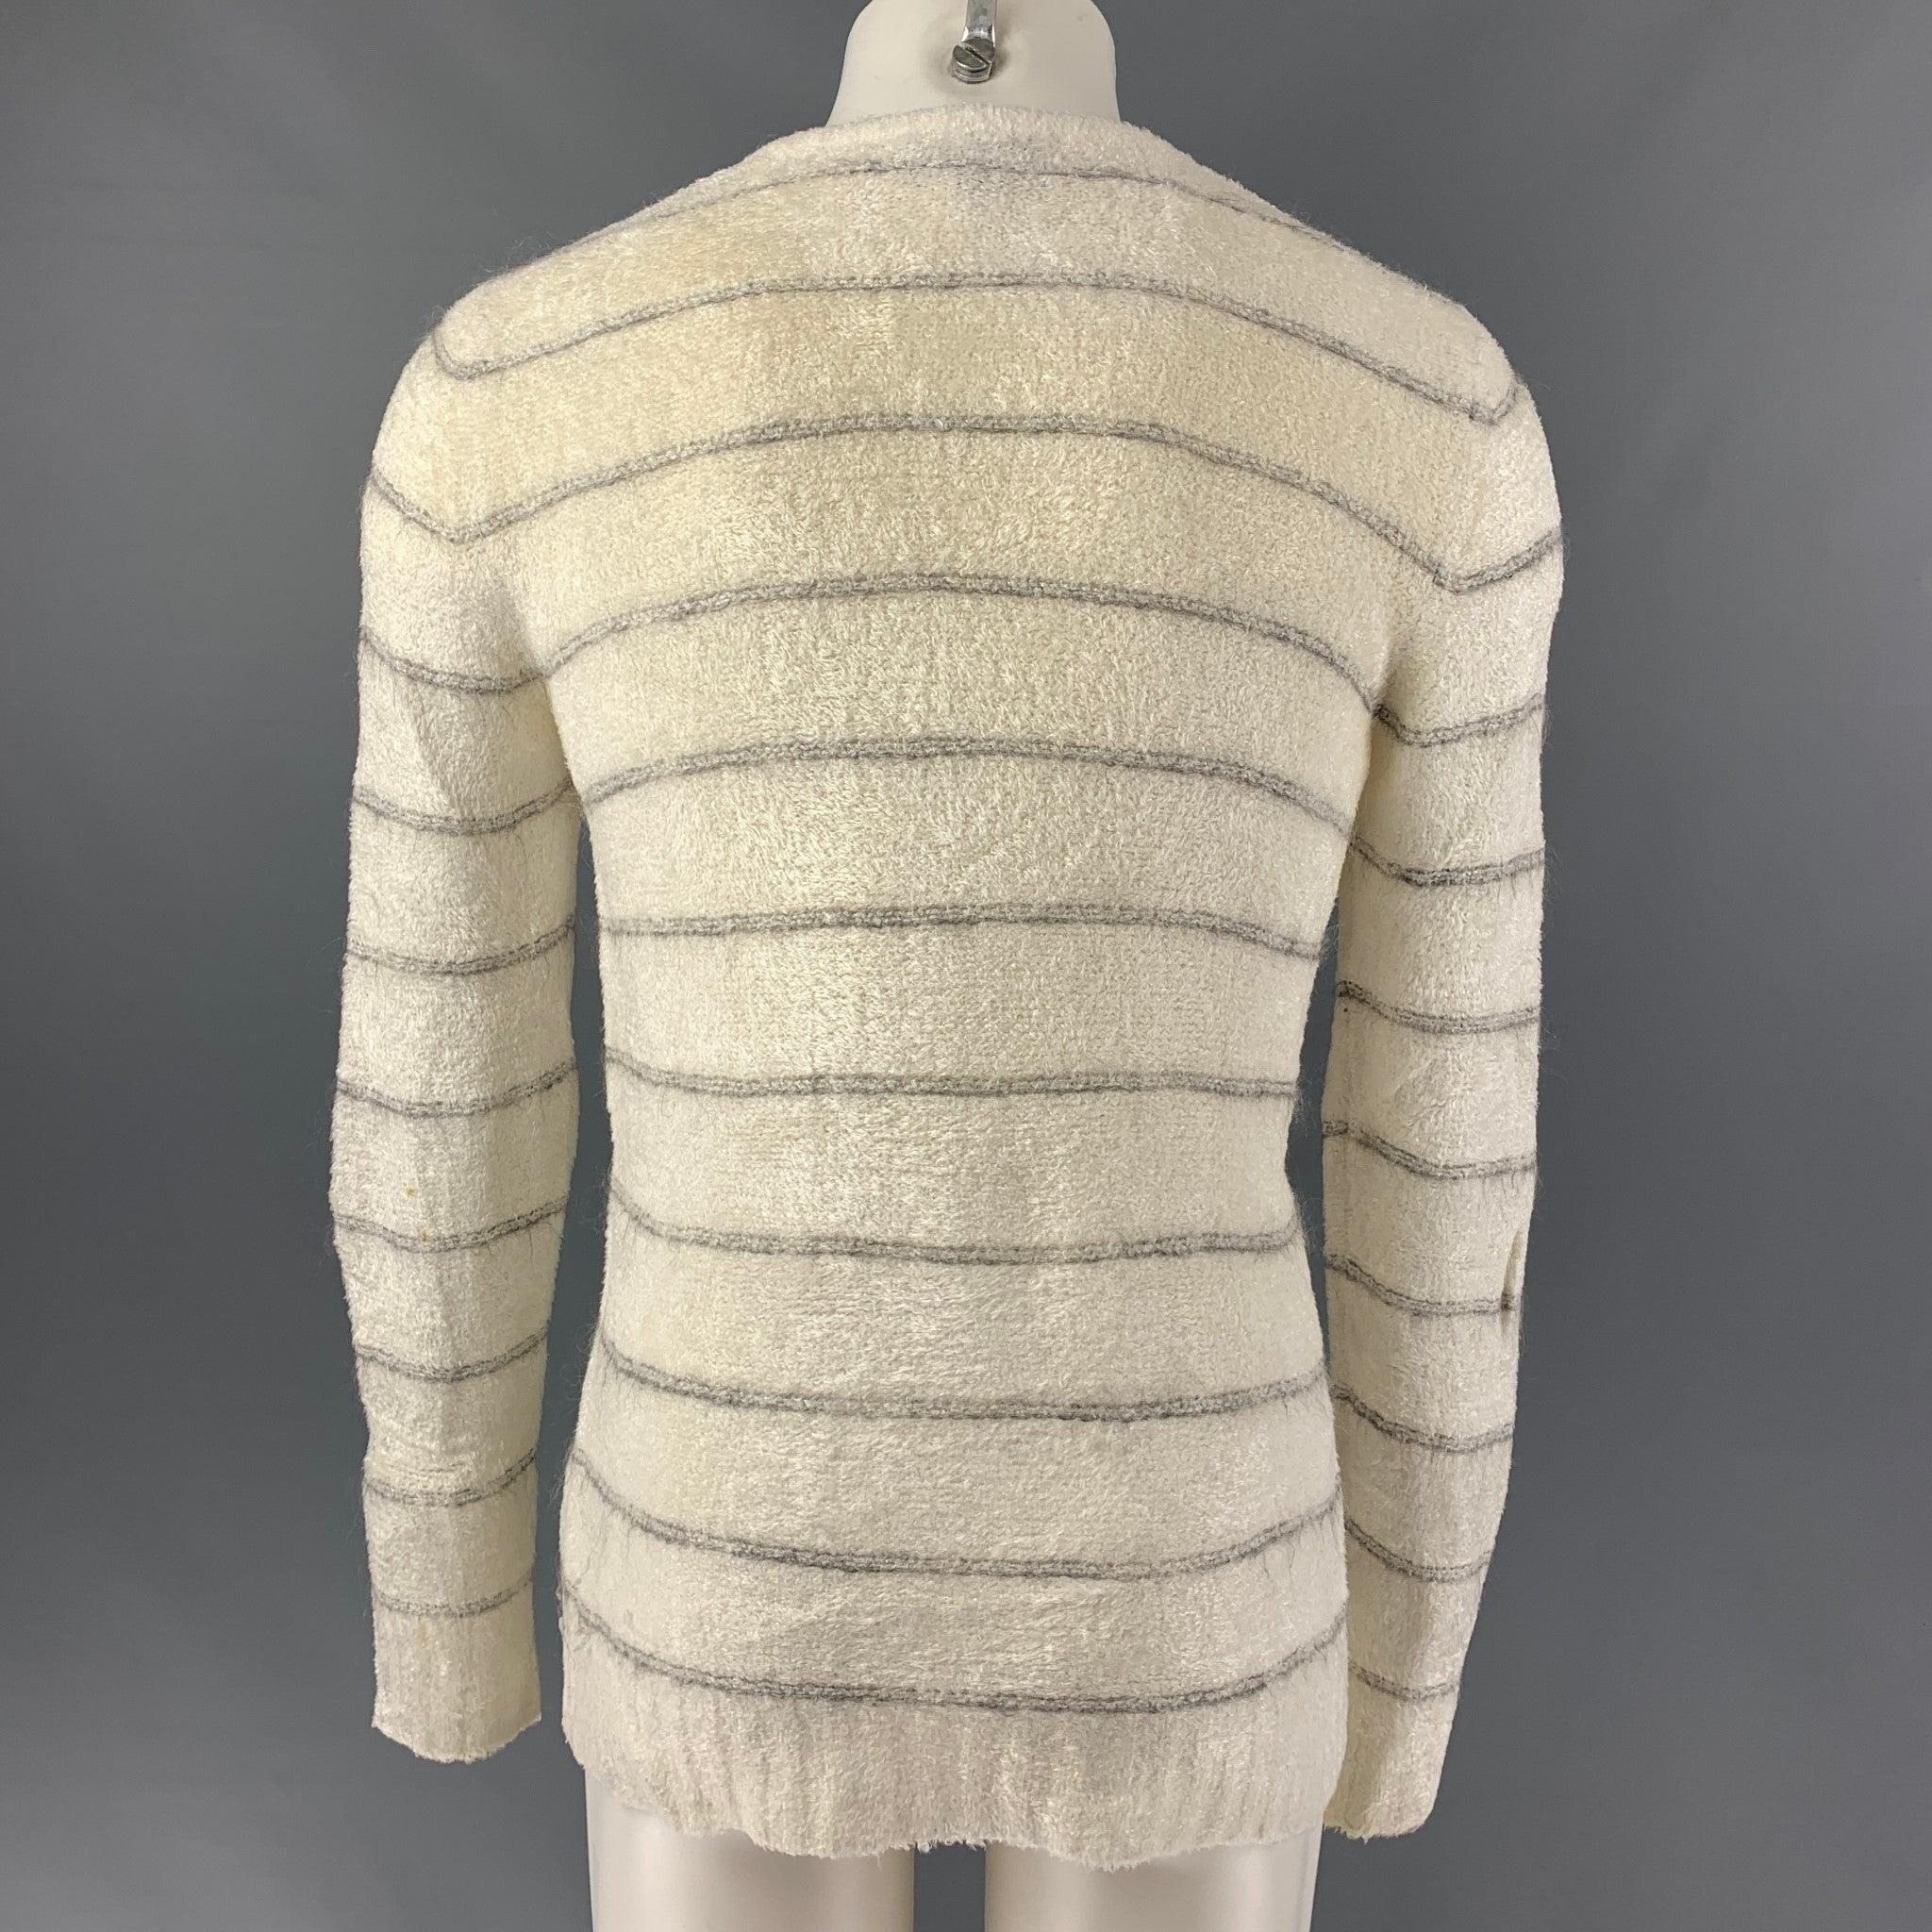 EMPORIO ARMANI sweater comes in a off white and grey stripped viscose blend chenille knit, featuring a v- neck. Made in Italy. Good Pre-Owned Condition. Minor seam splitting at right sleeve hem. 

Marked:   IT 36 

Measurements: 
 
Shoulder: 15